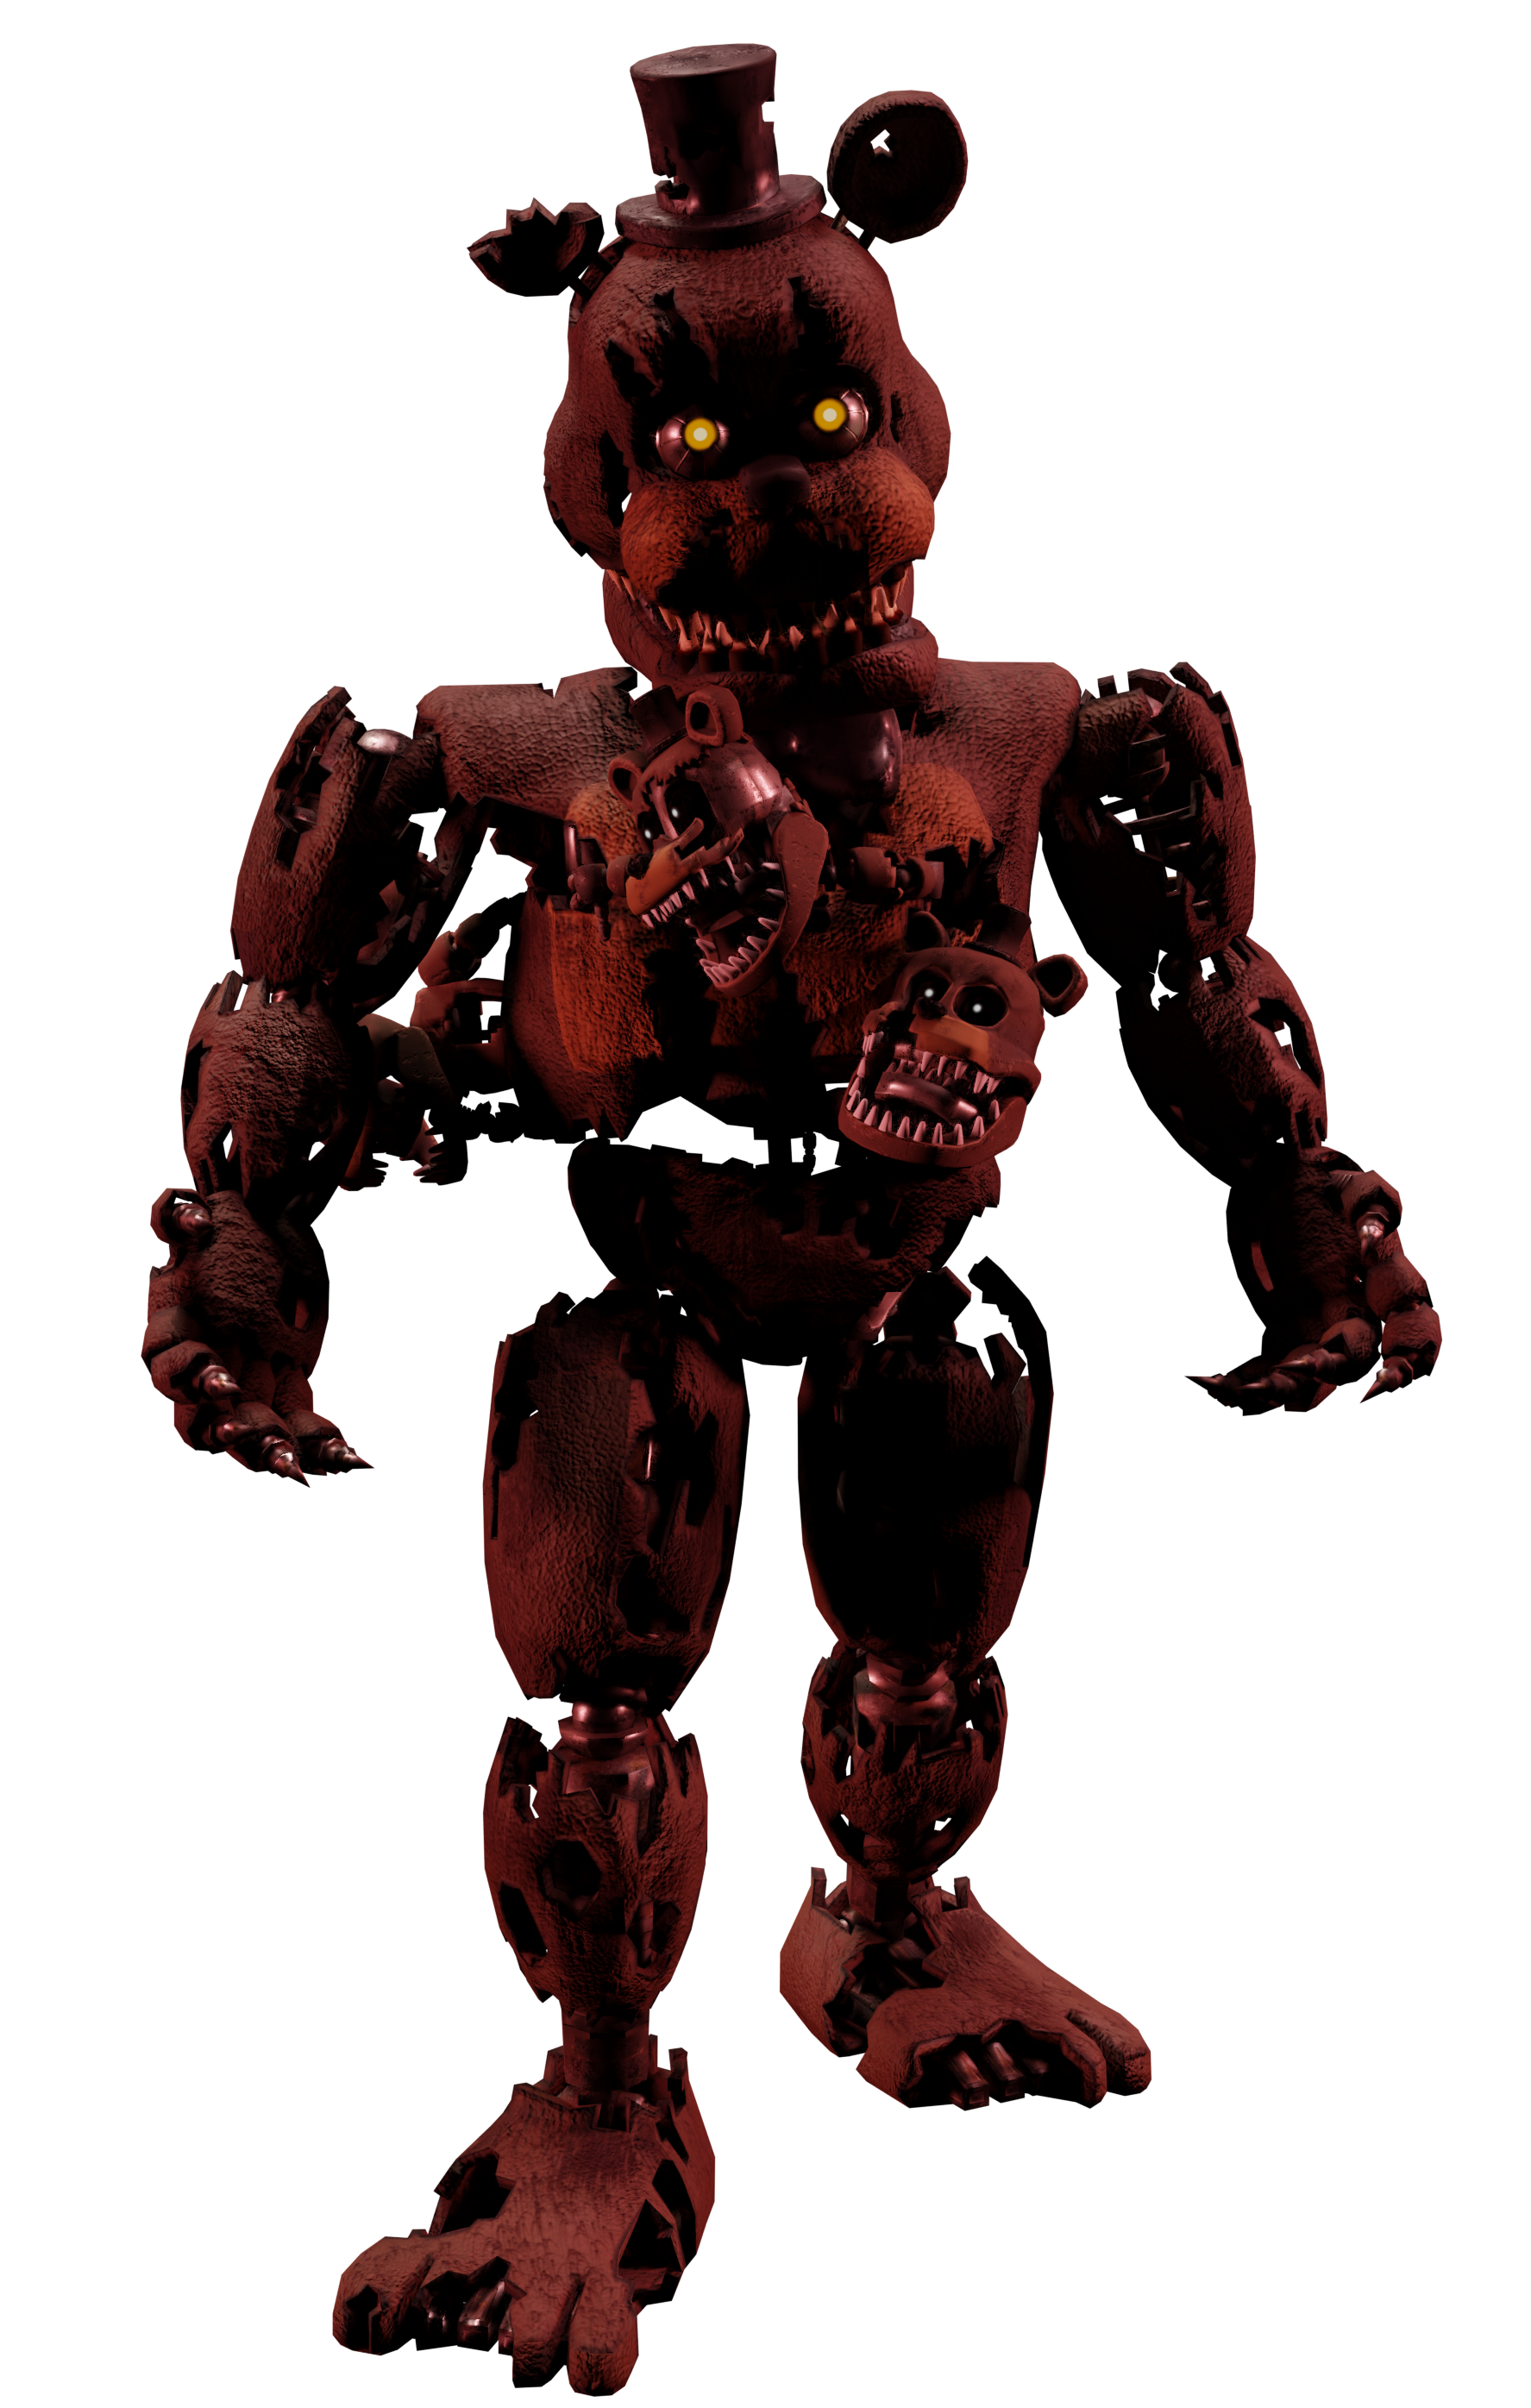 In honour of FNaF 4, where have we come as far as 'Plushtrap'. FNaF 4  gameplay is Michael and the effects of FNaF 1 on him, so what is the  additional nightmare/real